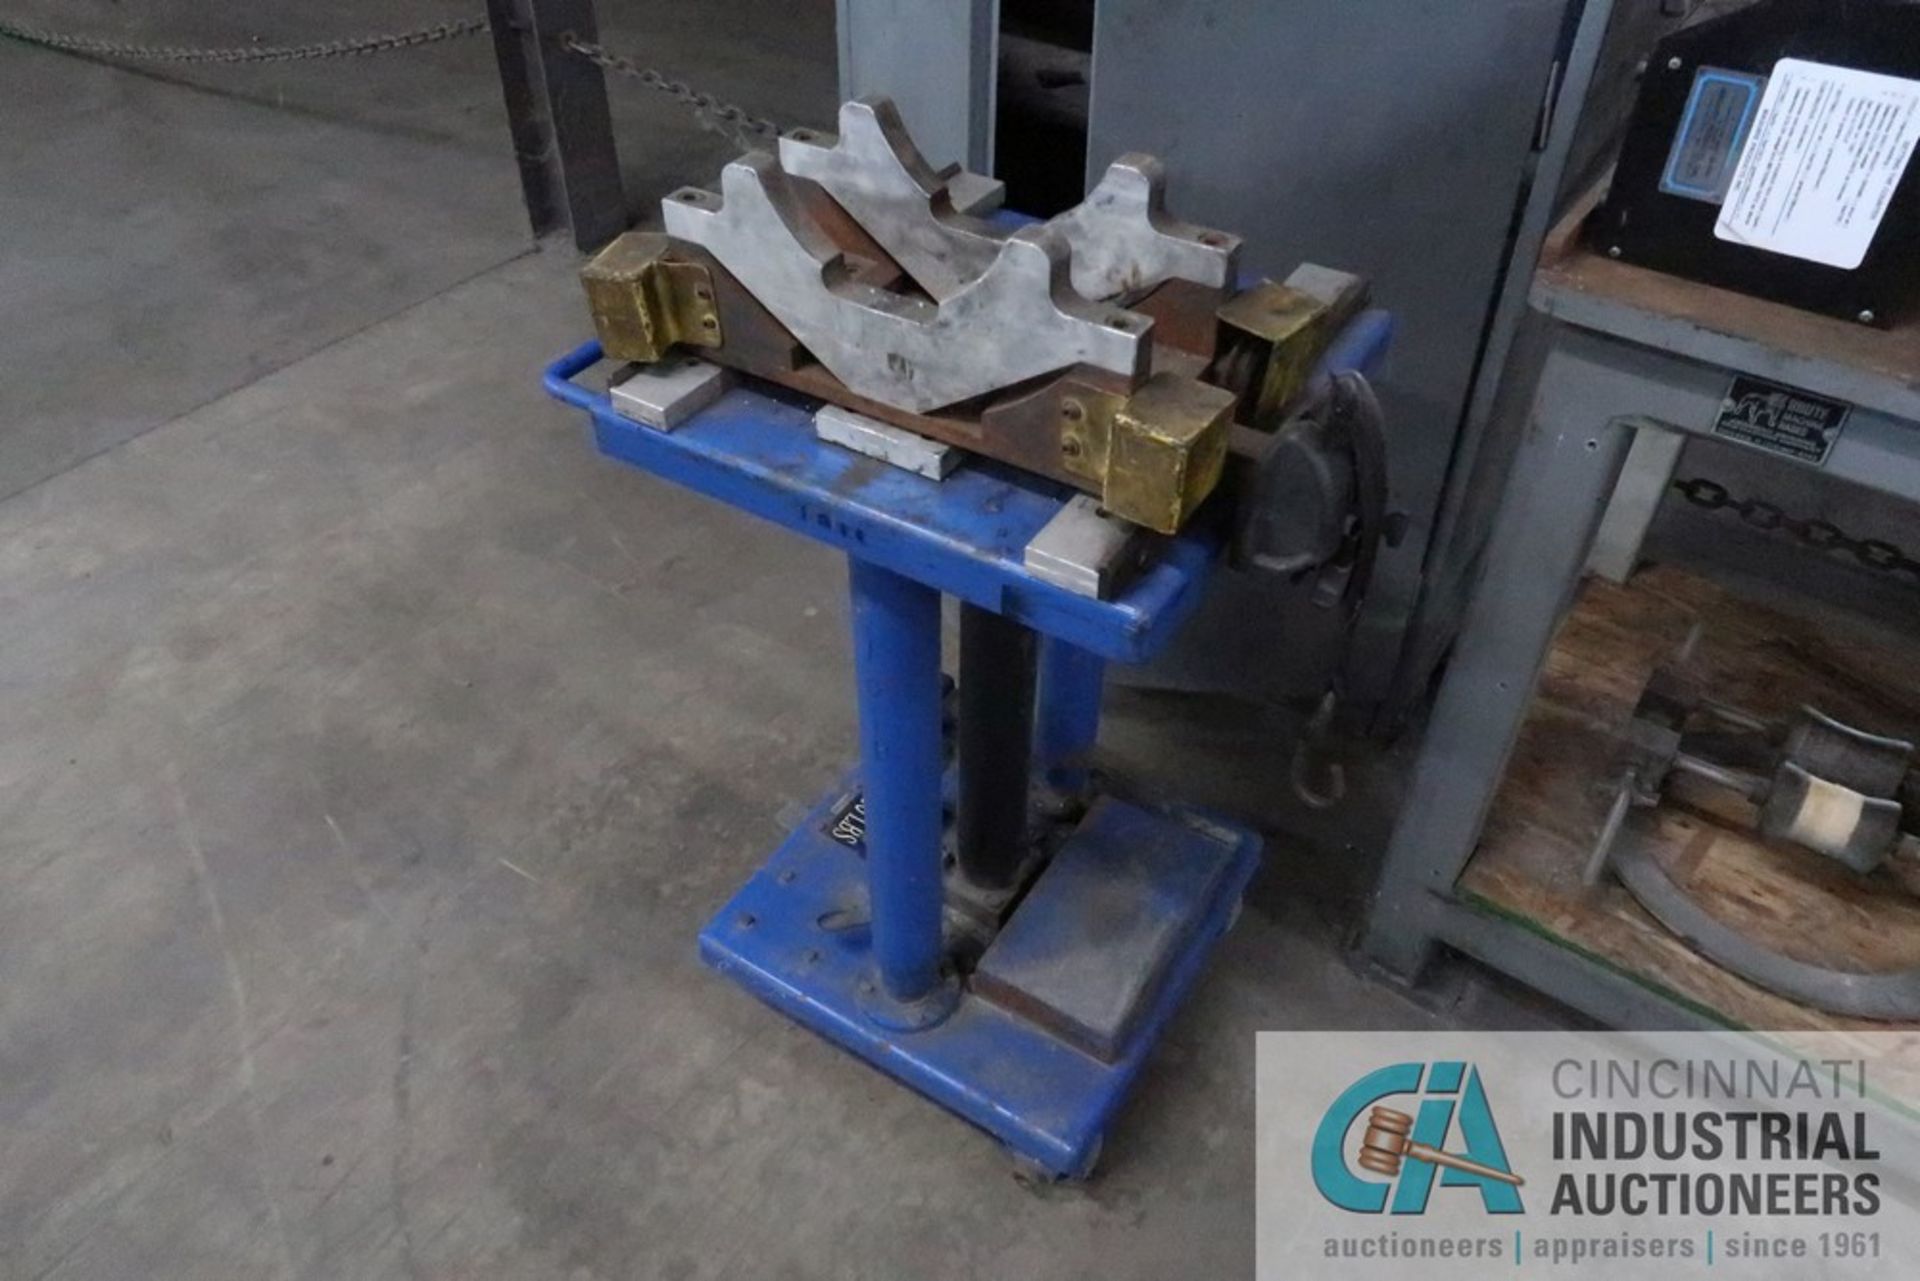 (LOT) EXTRUDER PARTS, MPI COUNTER, BRUTE MACHINE BASE, HD BENCH, DIE LIFT CART, 2-DOOR CABINET - Image 3 of 4